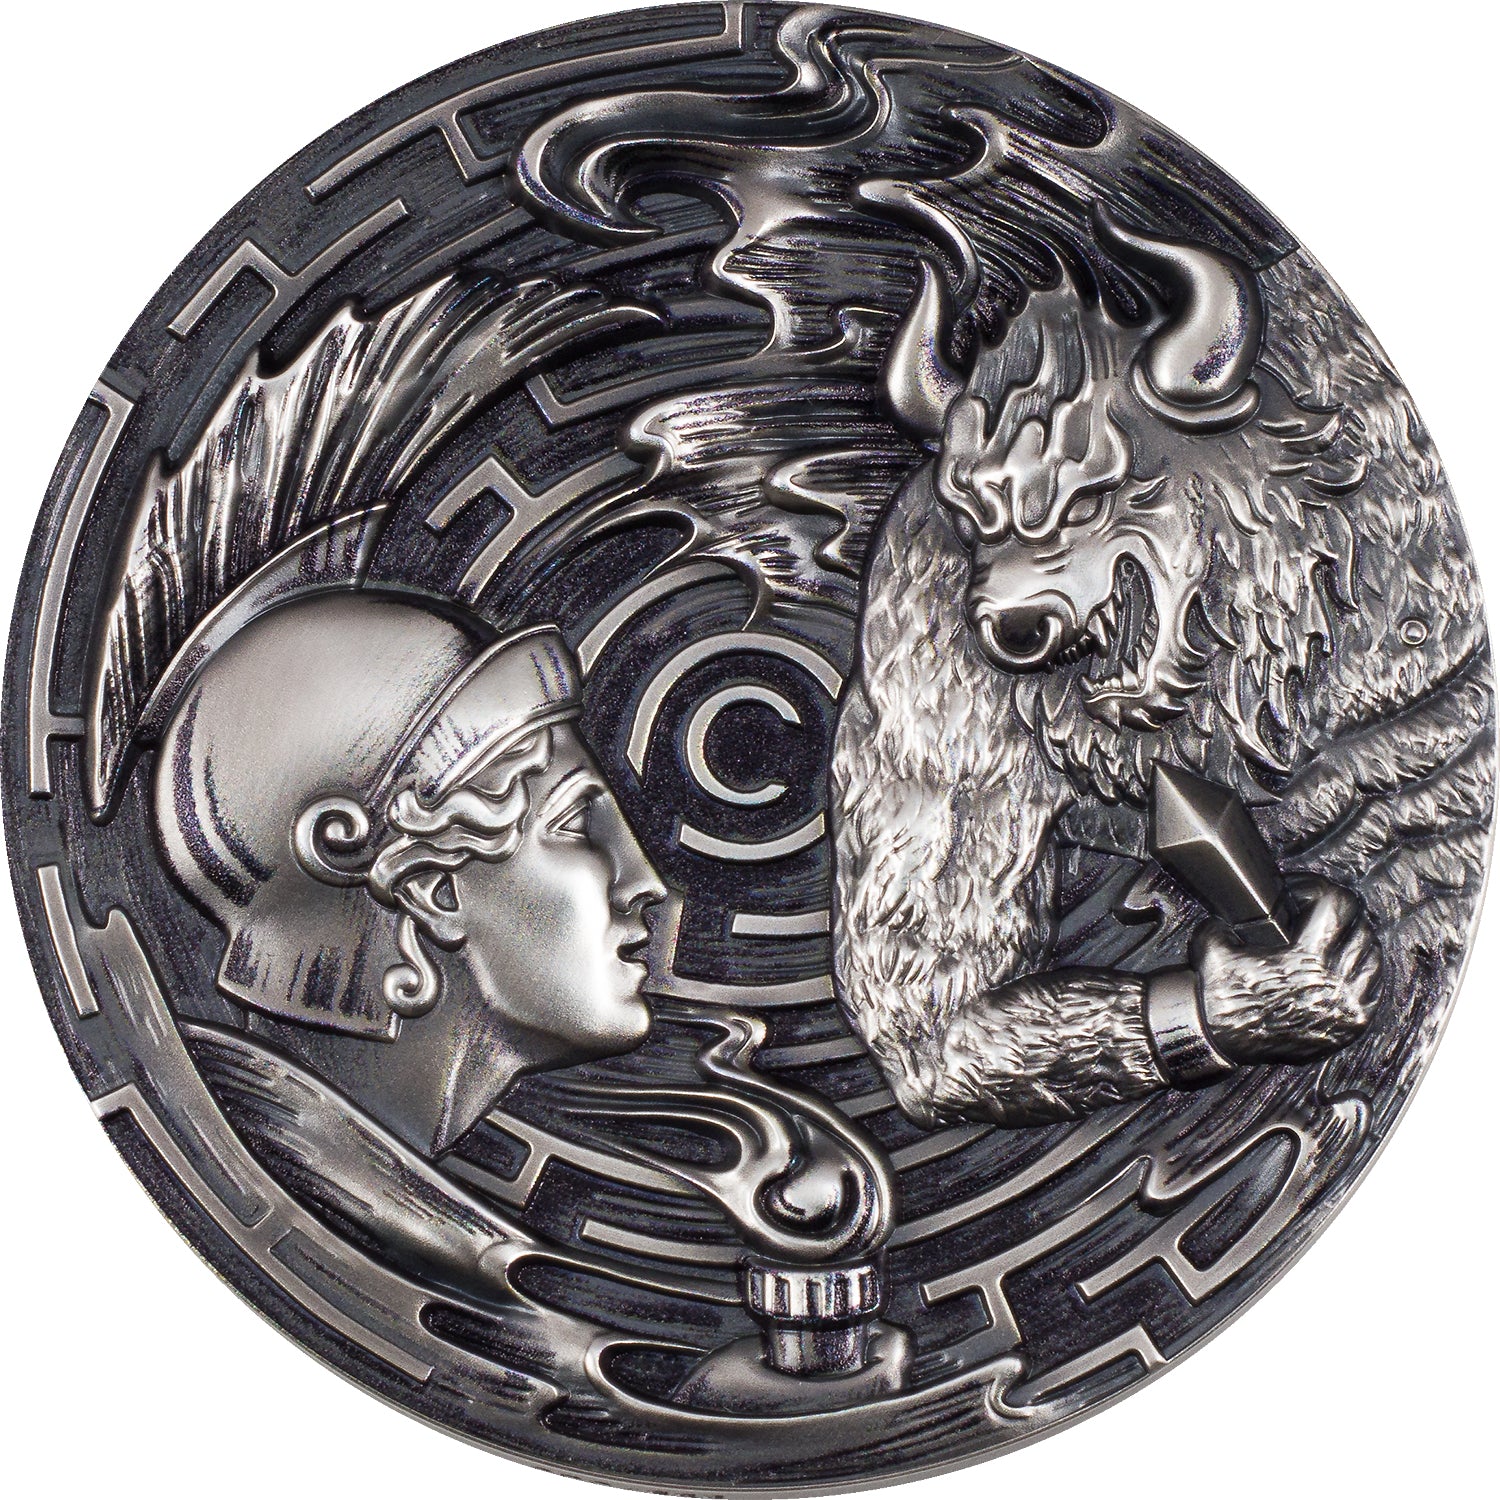 THESEUS AND THE MINOTAUR Evil Within 3 Oz Silver Coin $20 Palau 2021